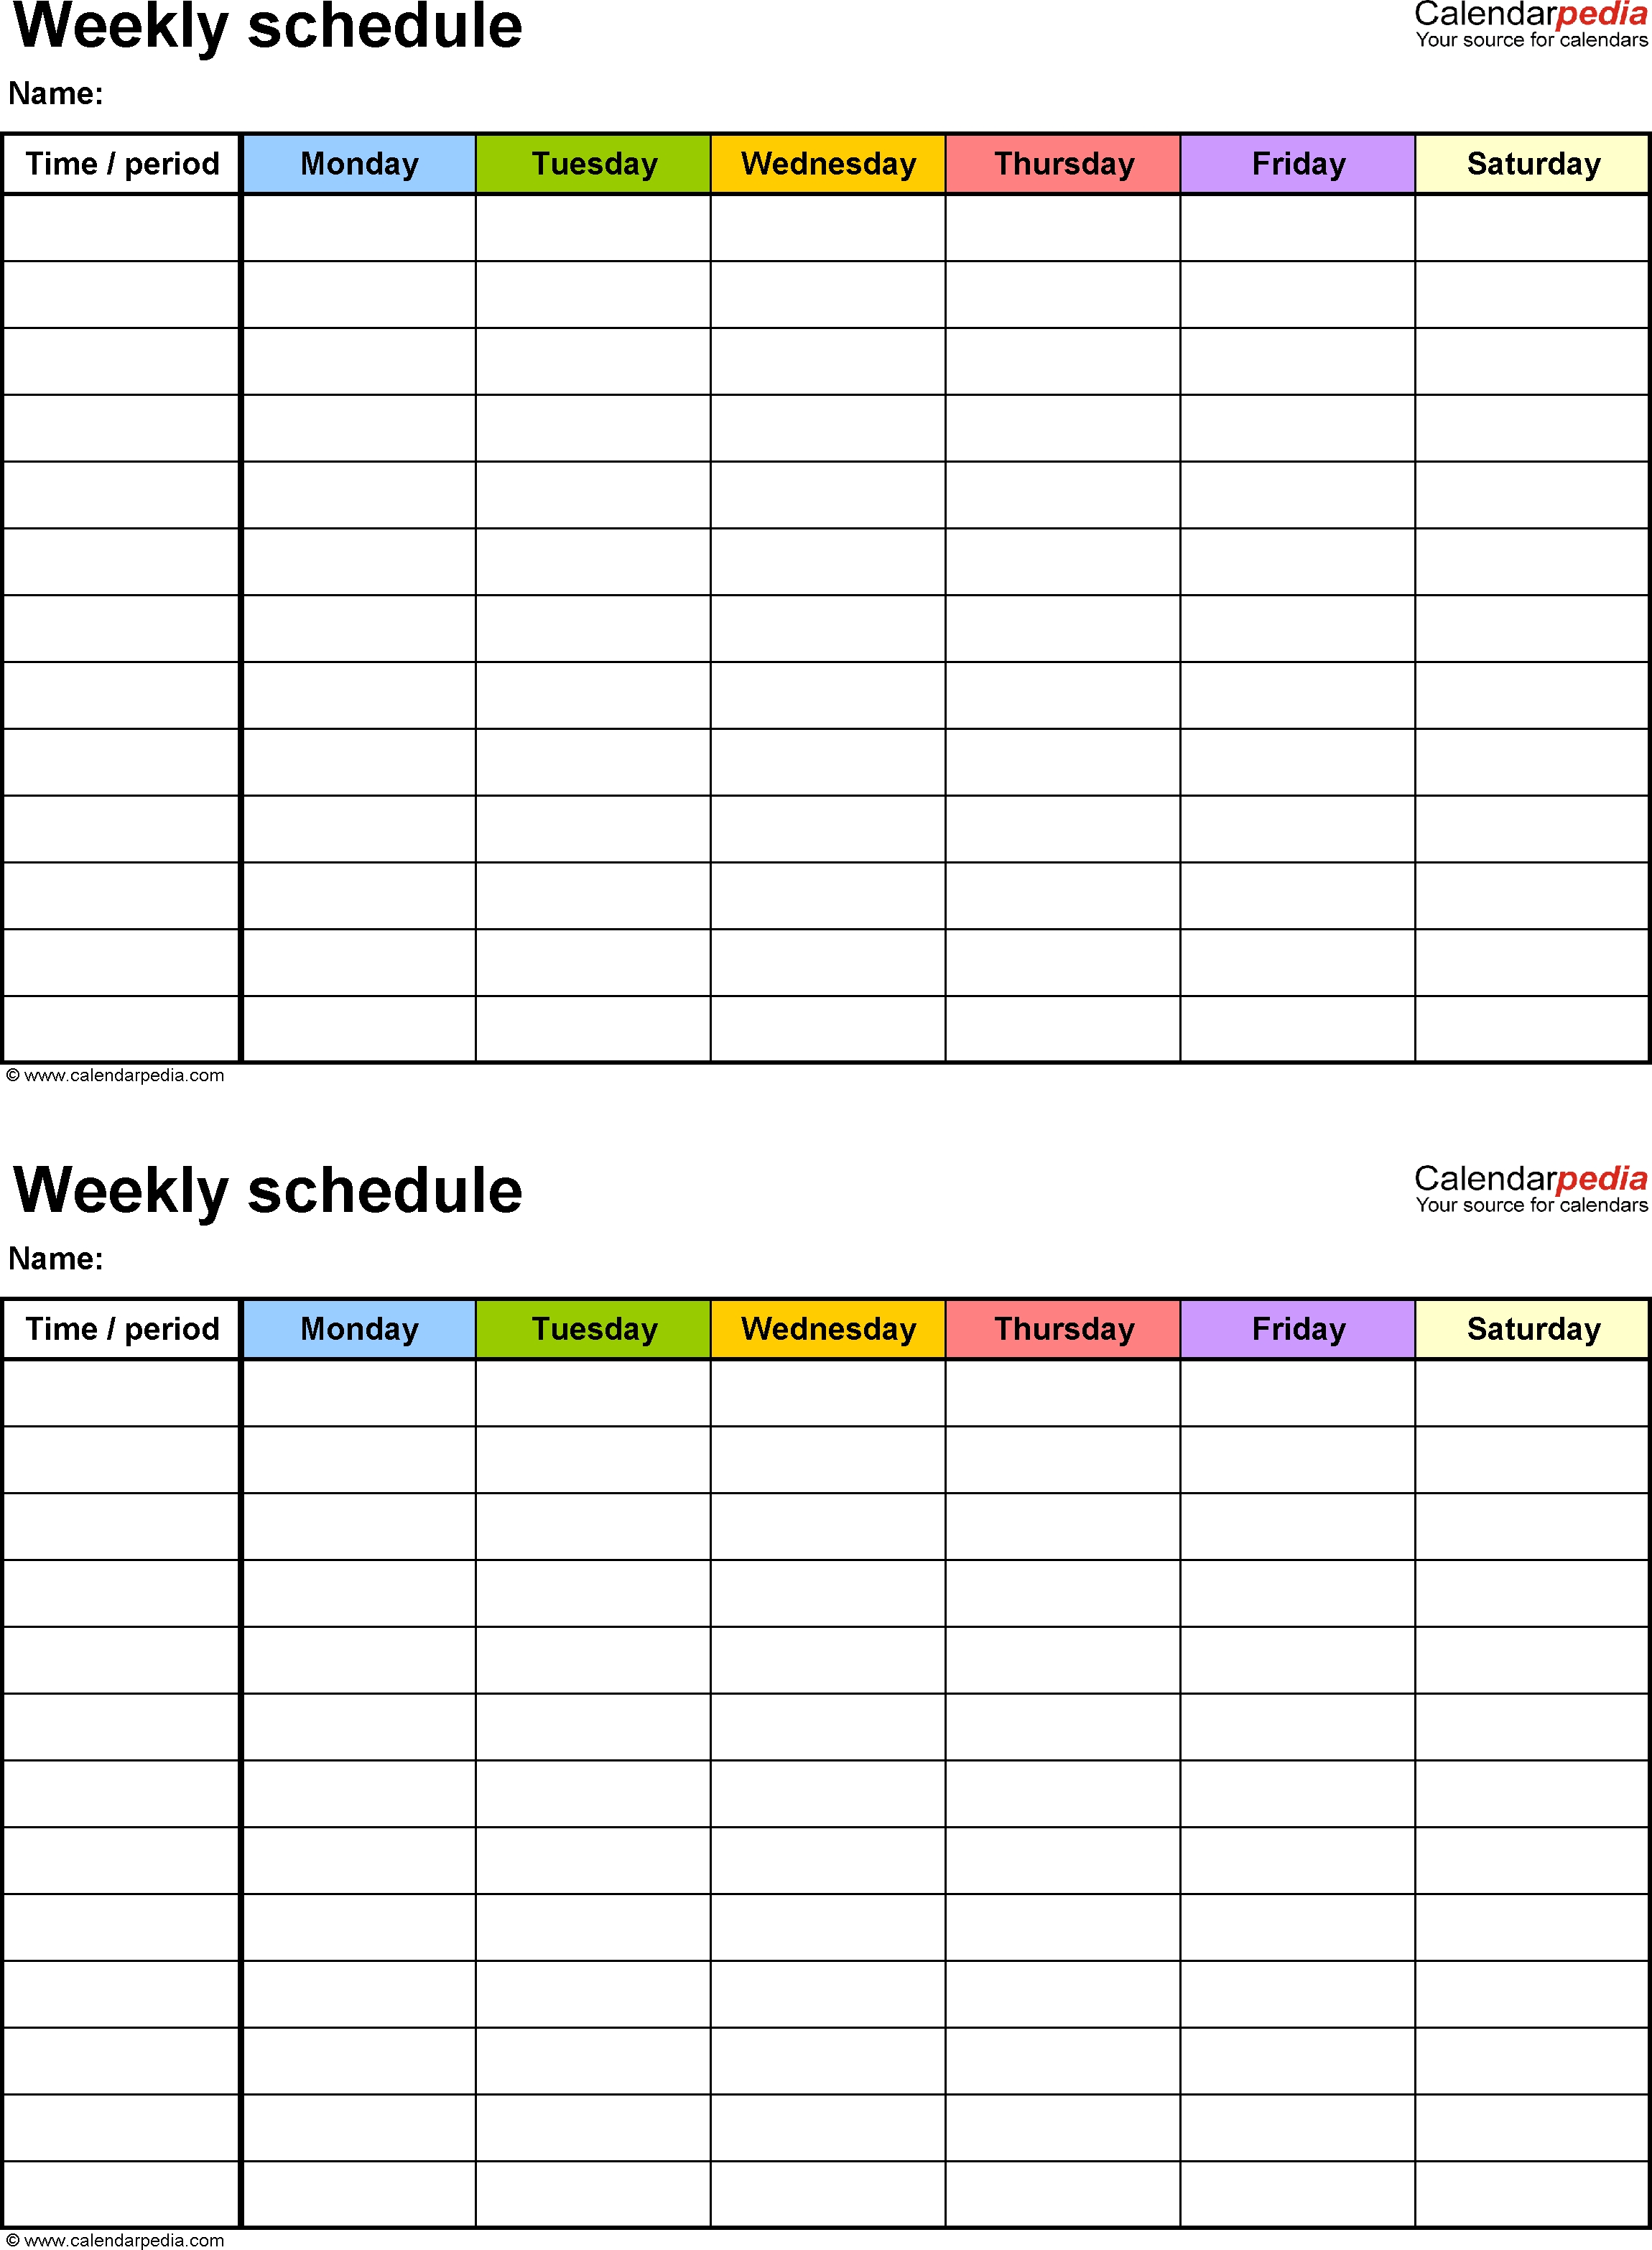 Free Weekly Schedule Templates For Word - 18 Templates inside 7 Day Calendar Template Free